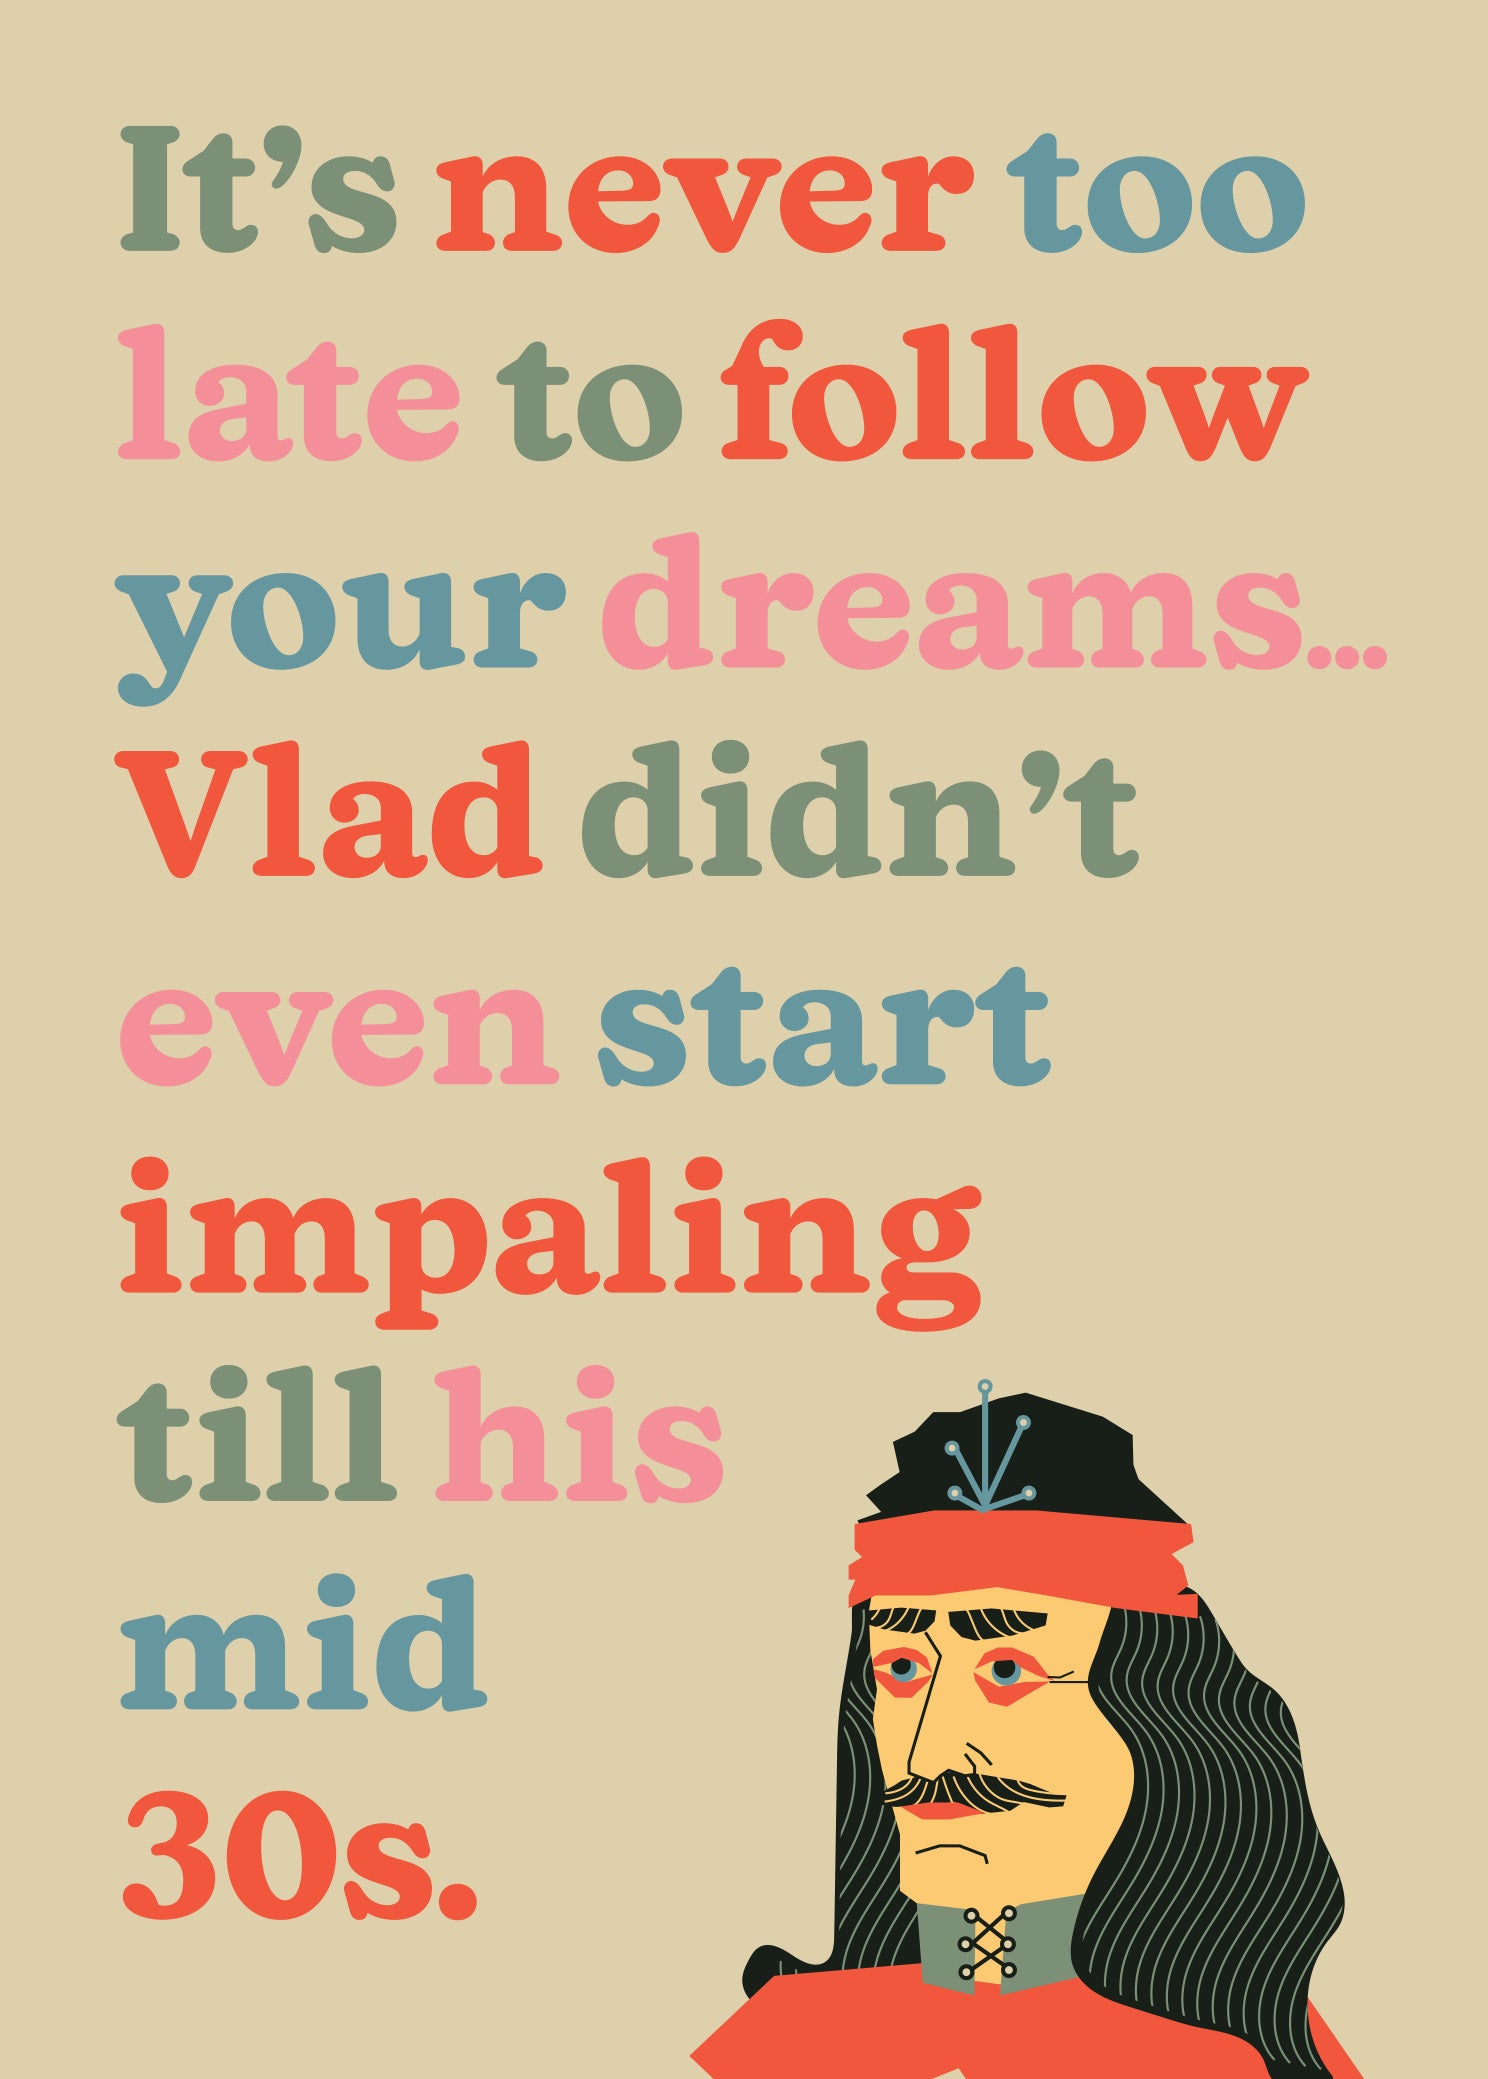 Follow Your Dreams Vlad The Impaler Funny Card by Betiobca at penny black